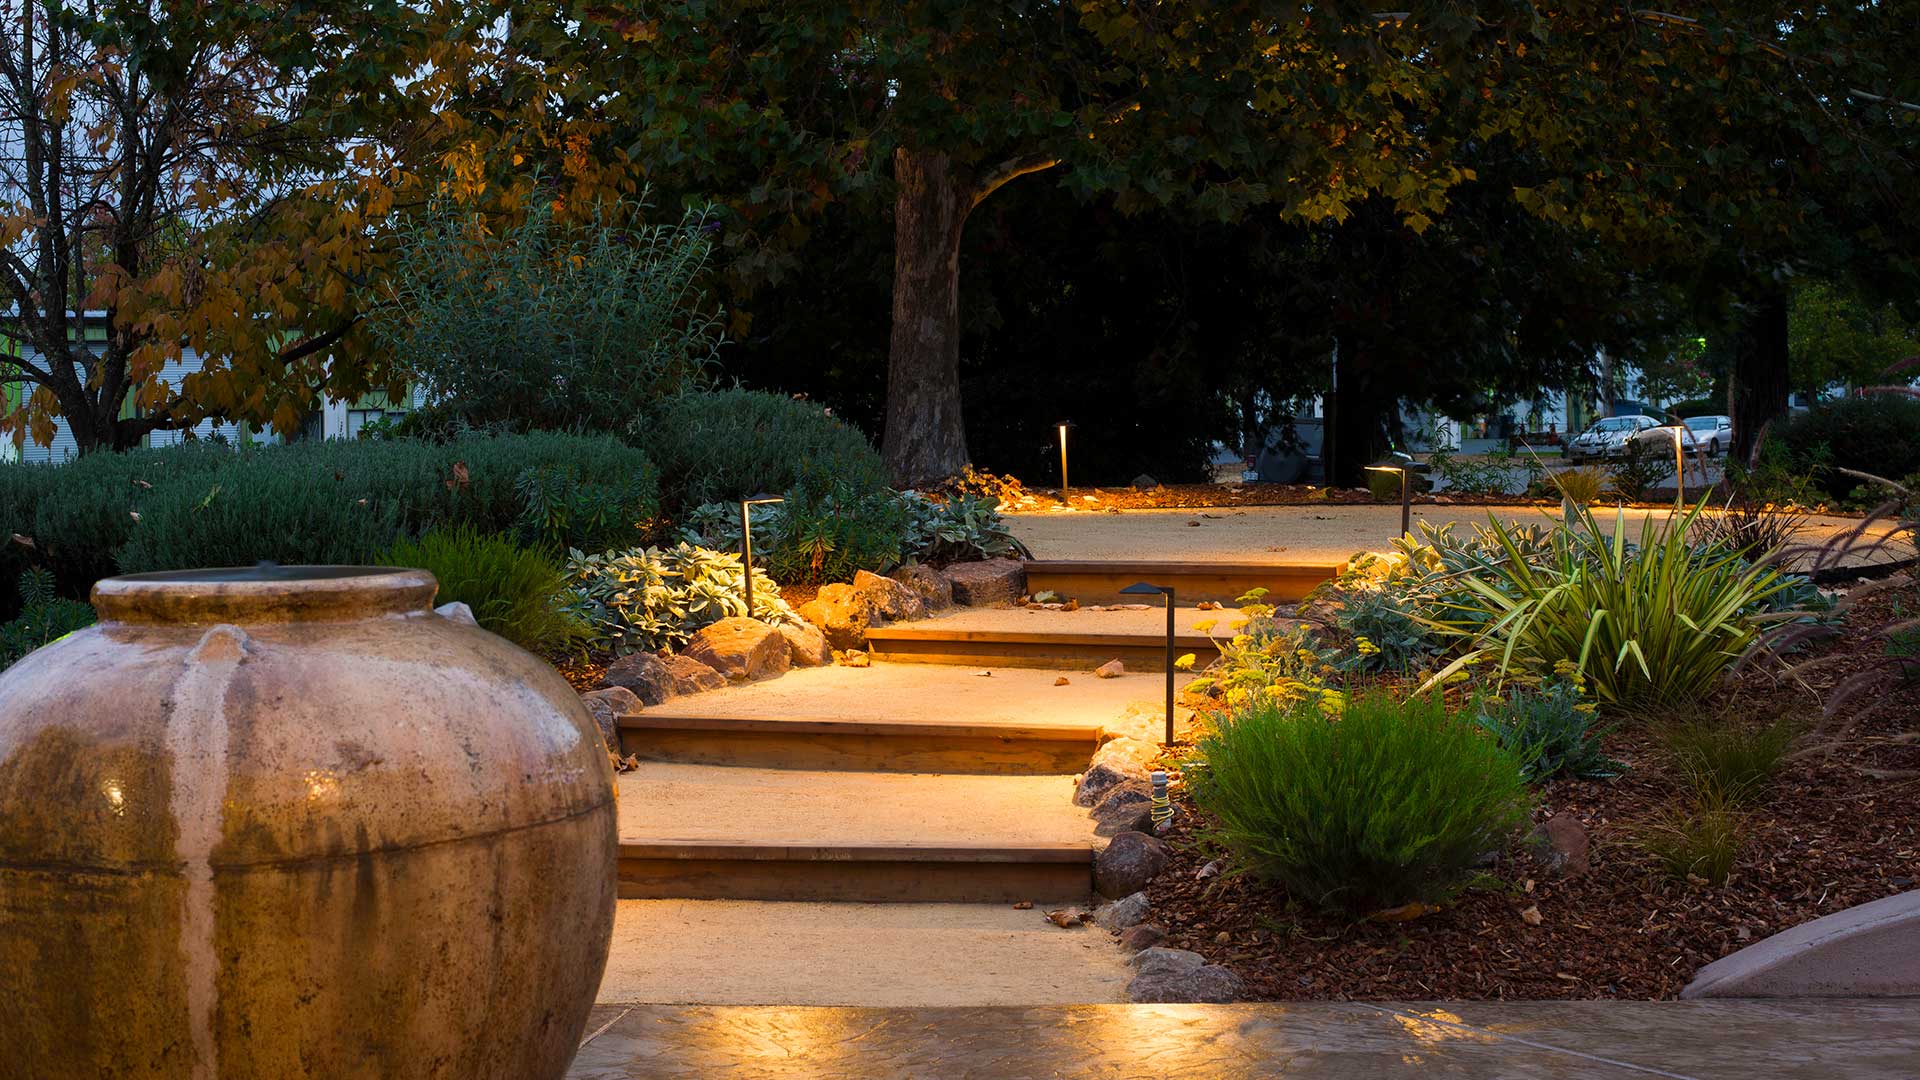 Outdoor of tasting room, garden with path and steps leading to seating area.